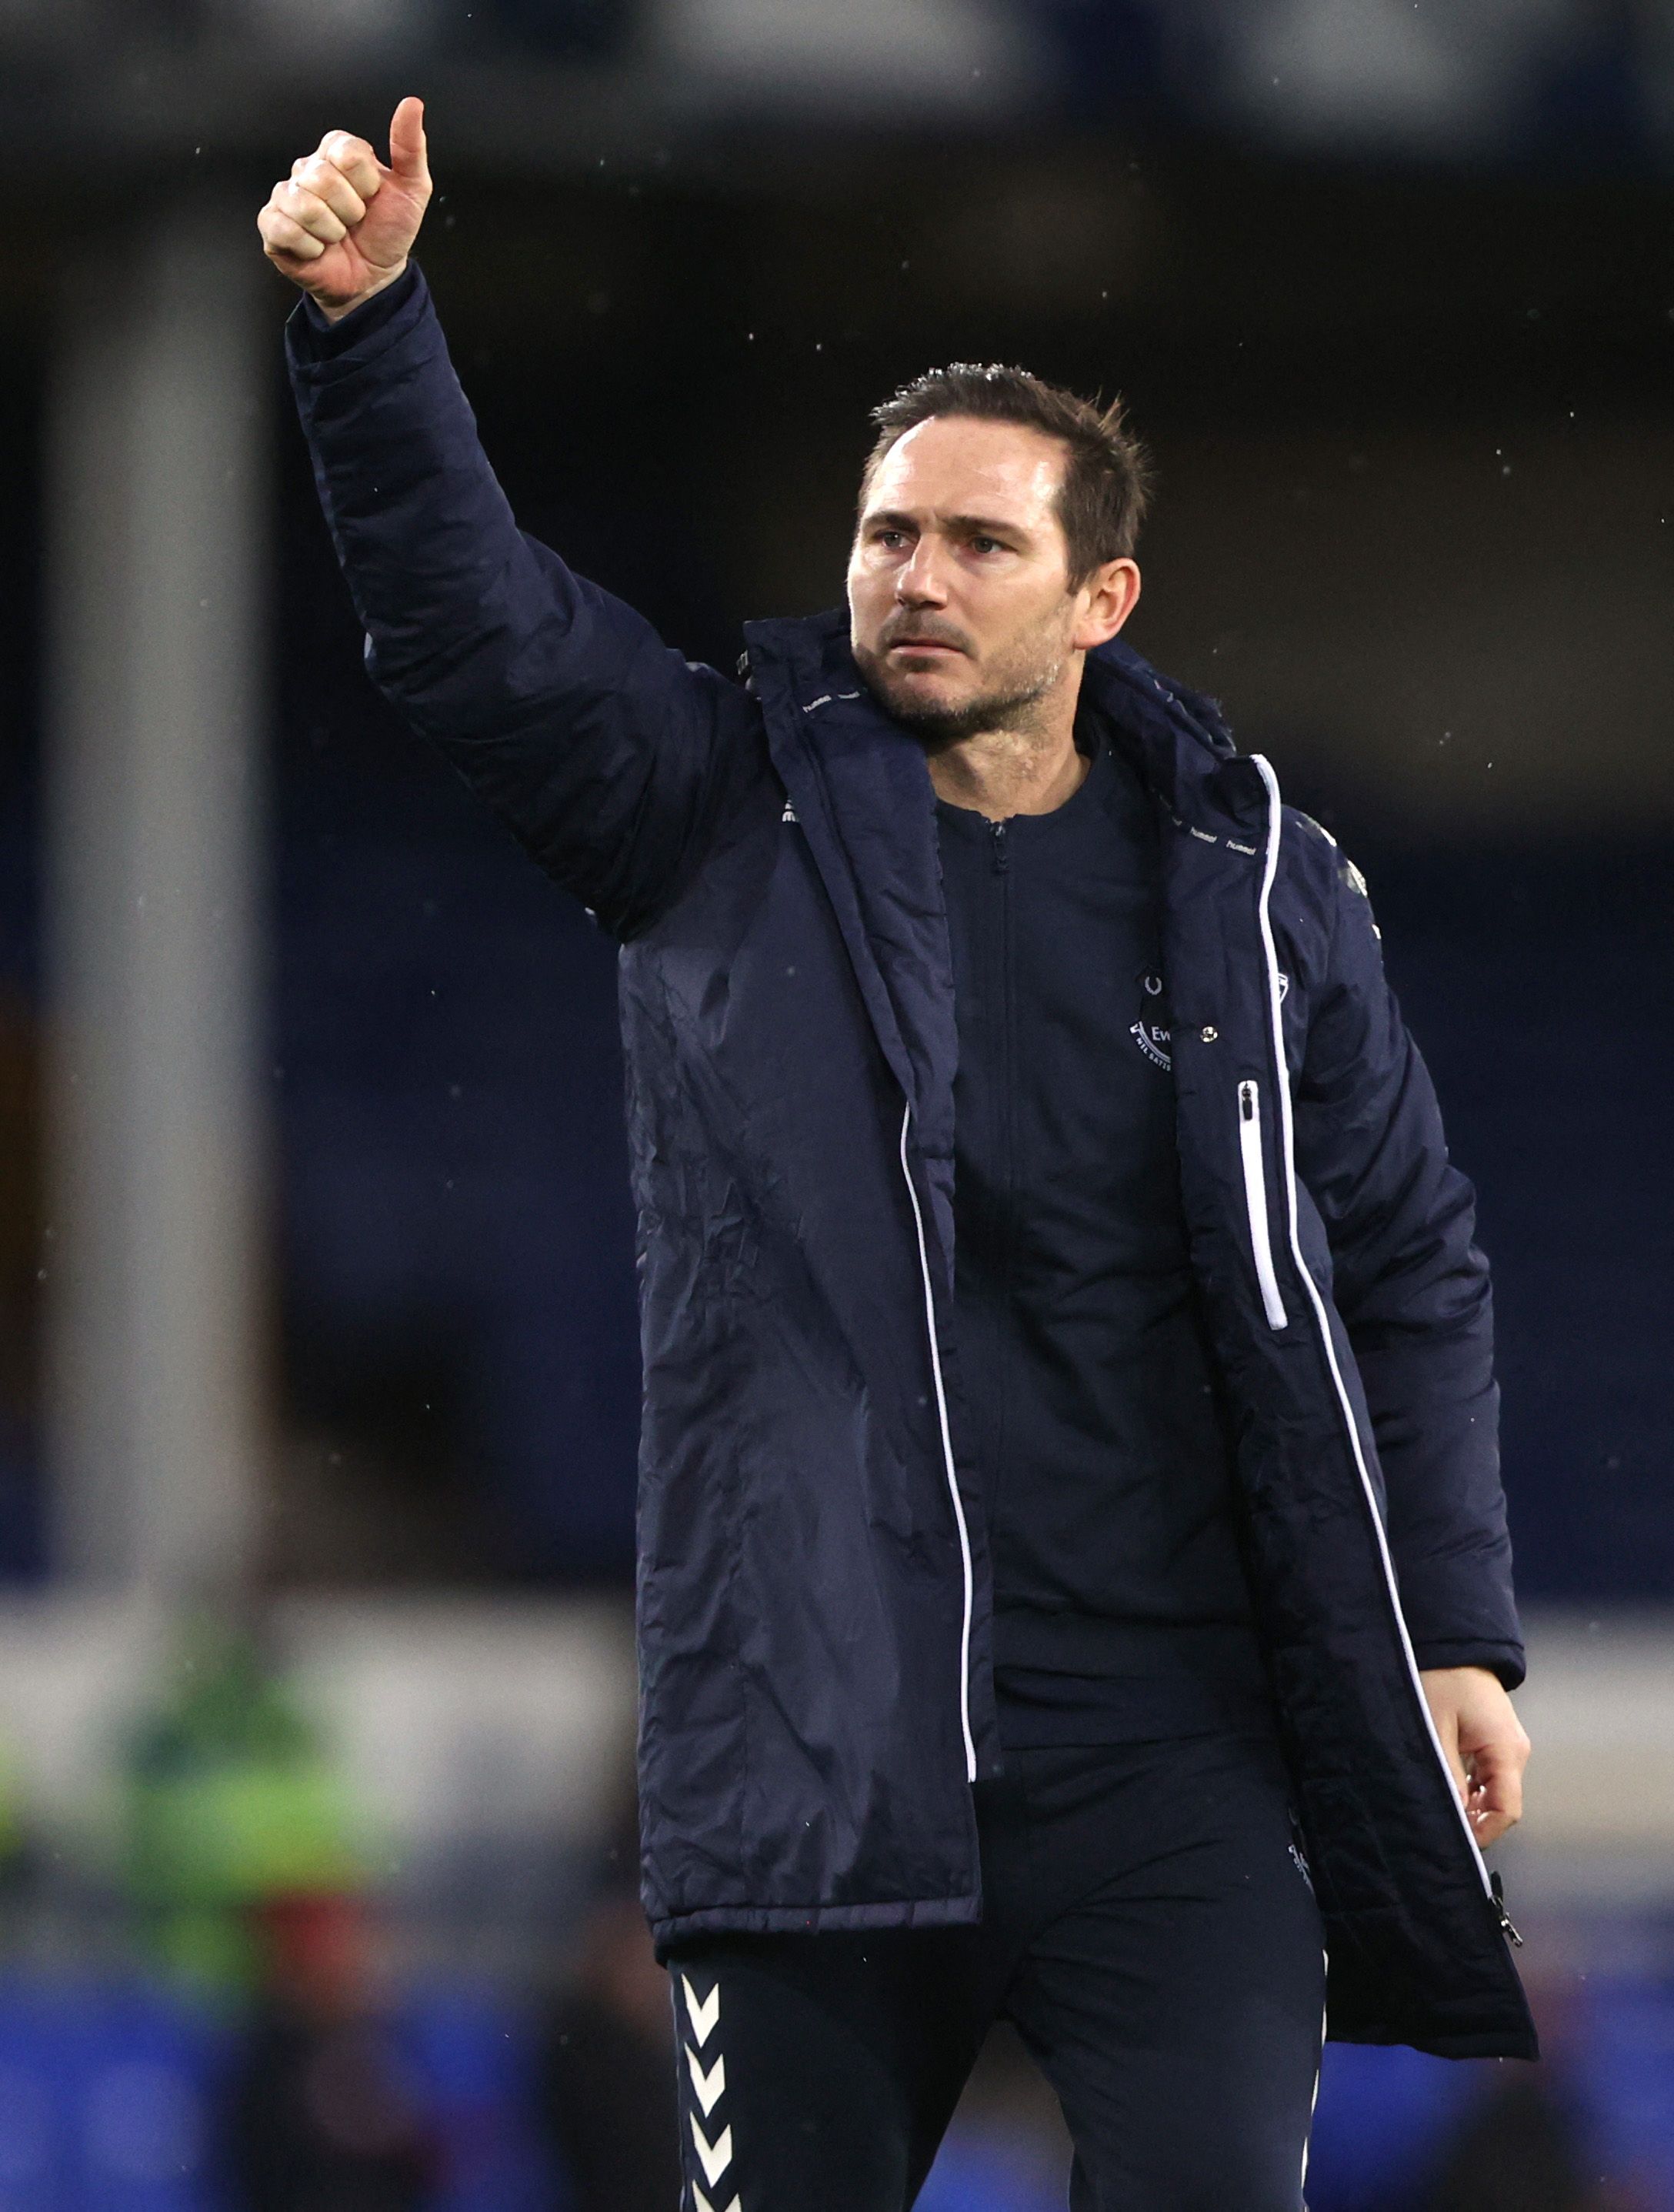 Everton's Lampard gives a thumbs up.